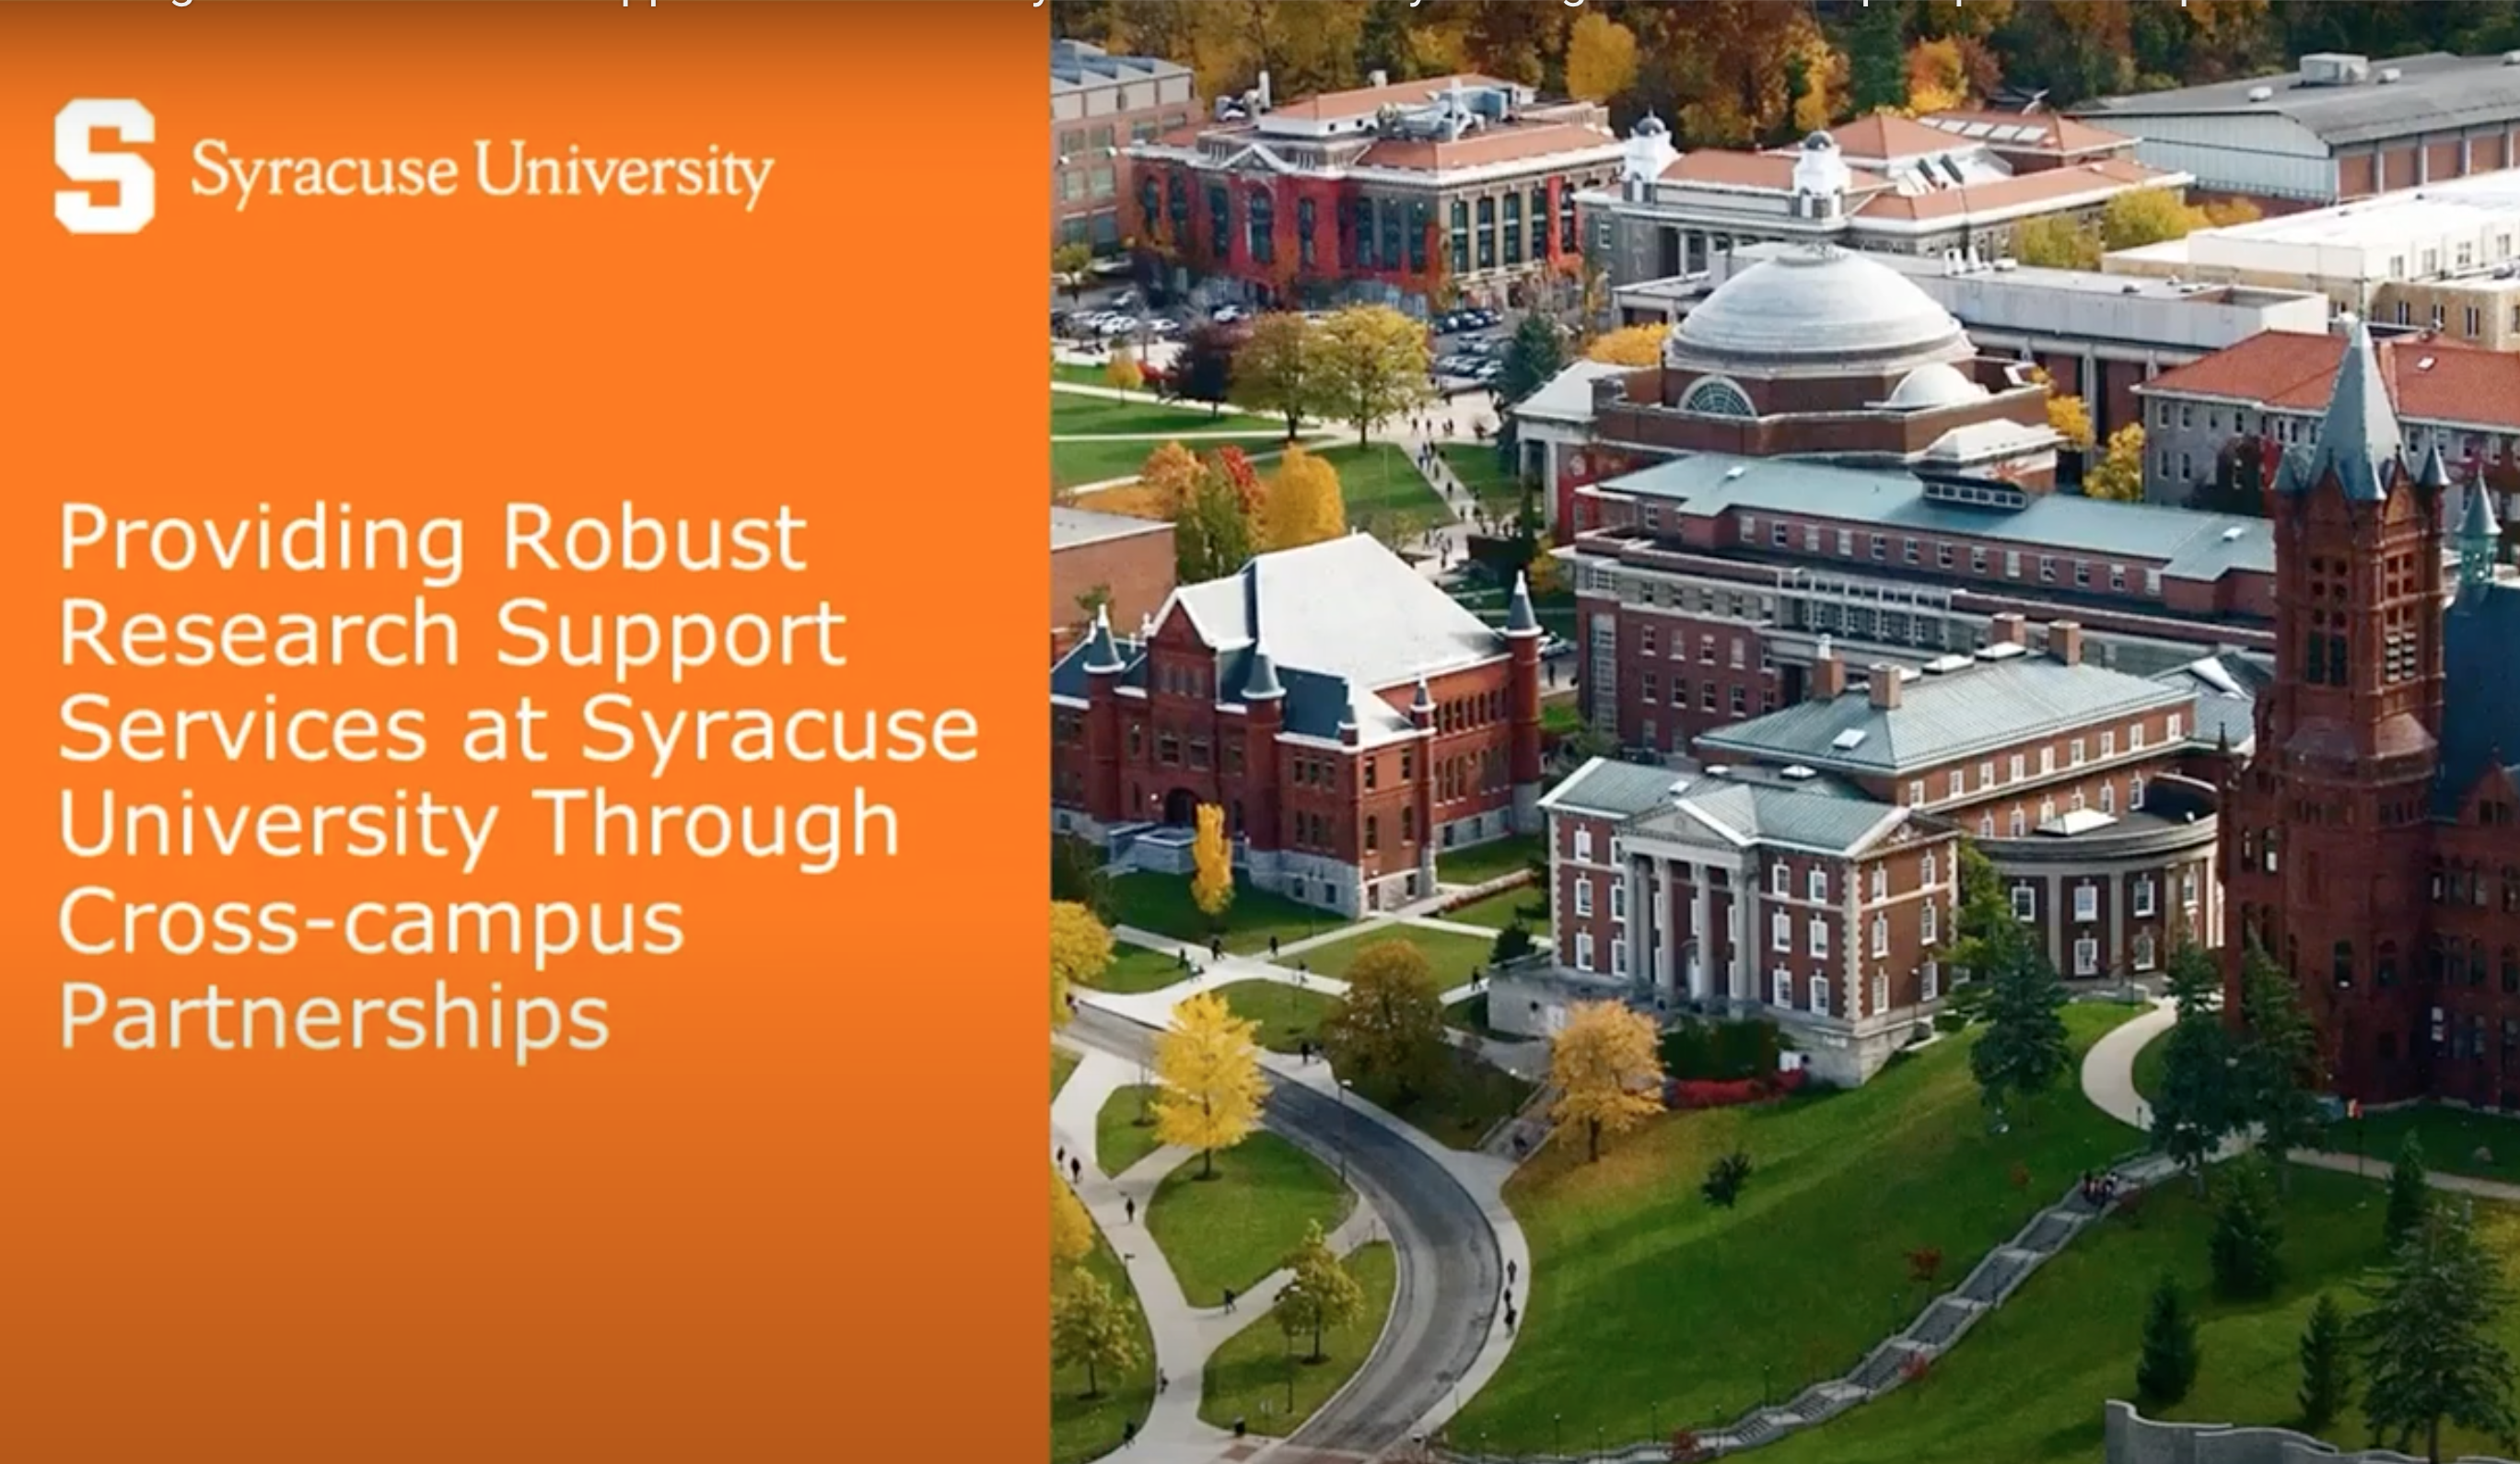 Providing robust research support services at Syracuse University through cross-campus partnerships